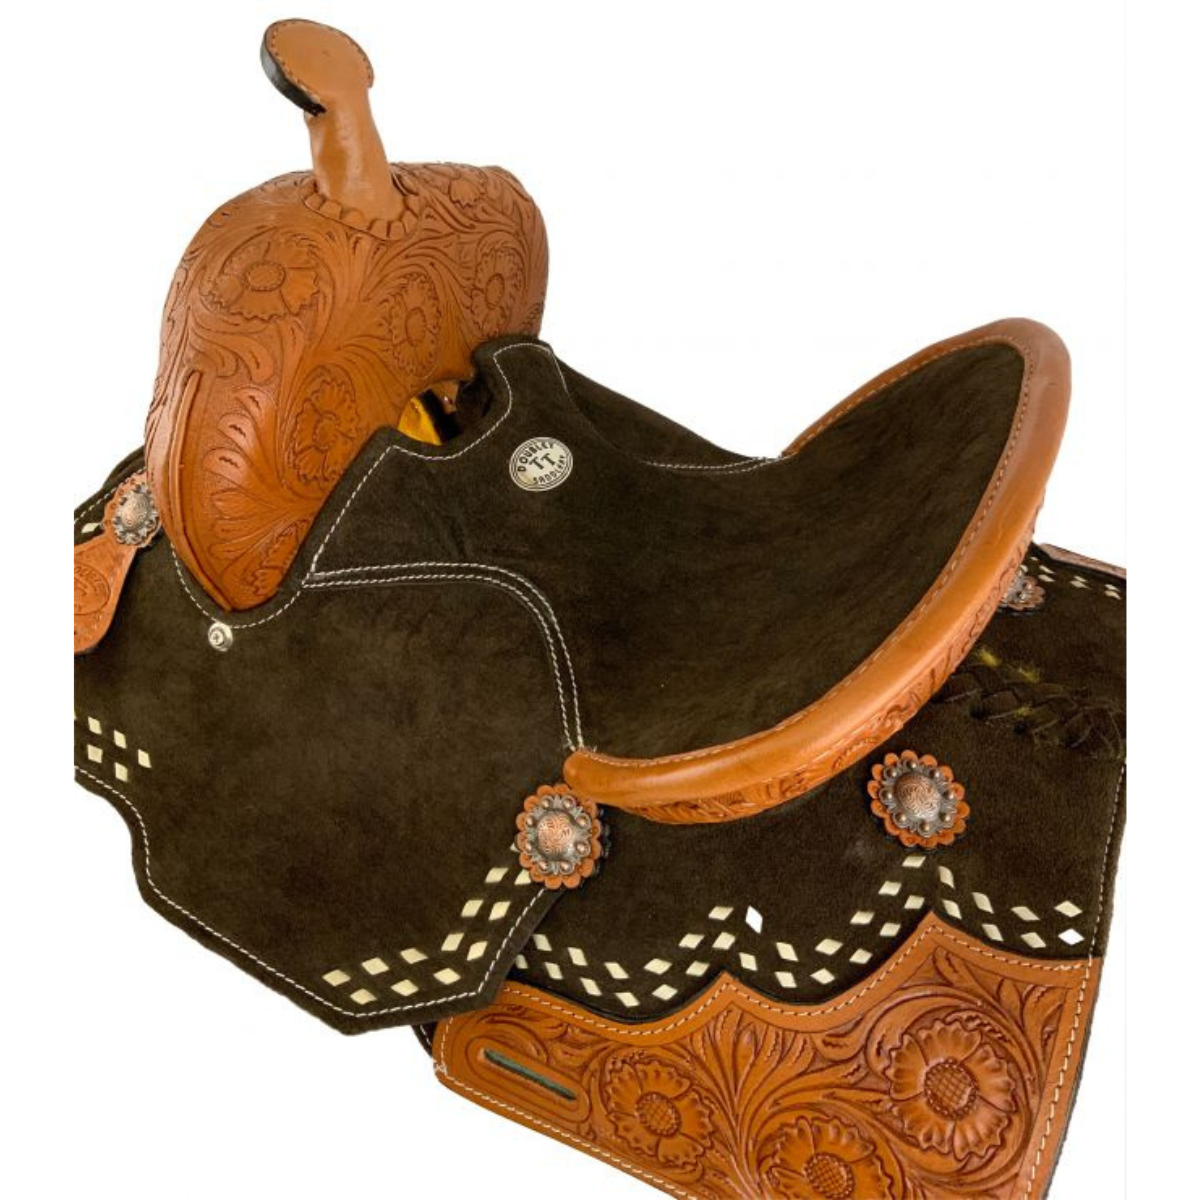 12" Double T Youth Brown Suede Barrel Saddle With Floral Tooling and White Buckstitching. - Double T Saddles